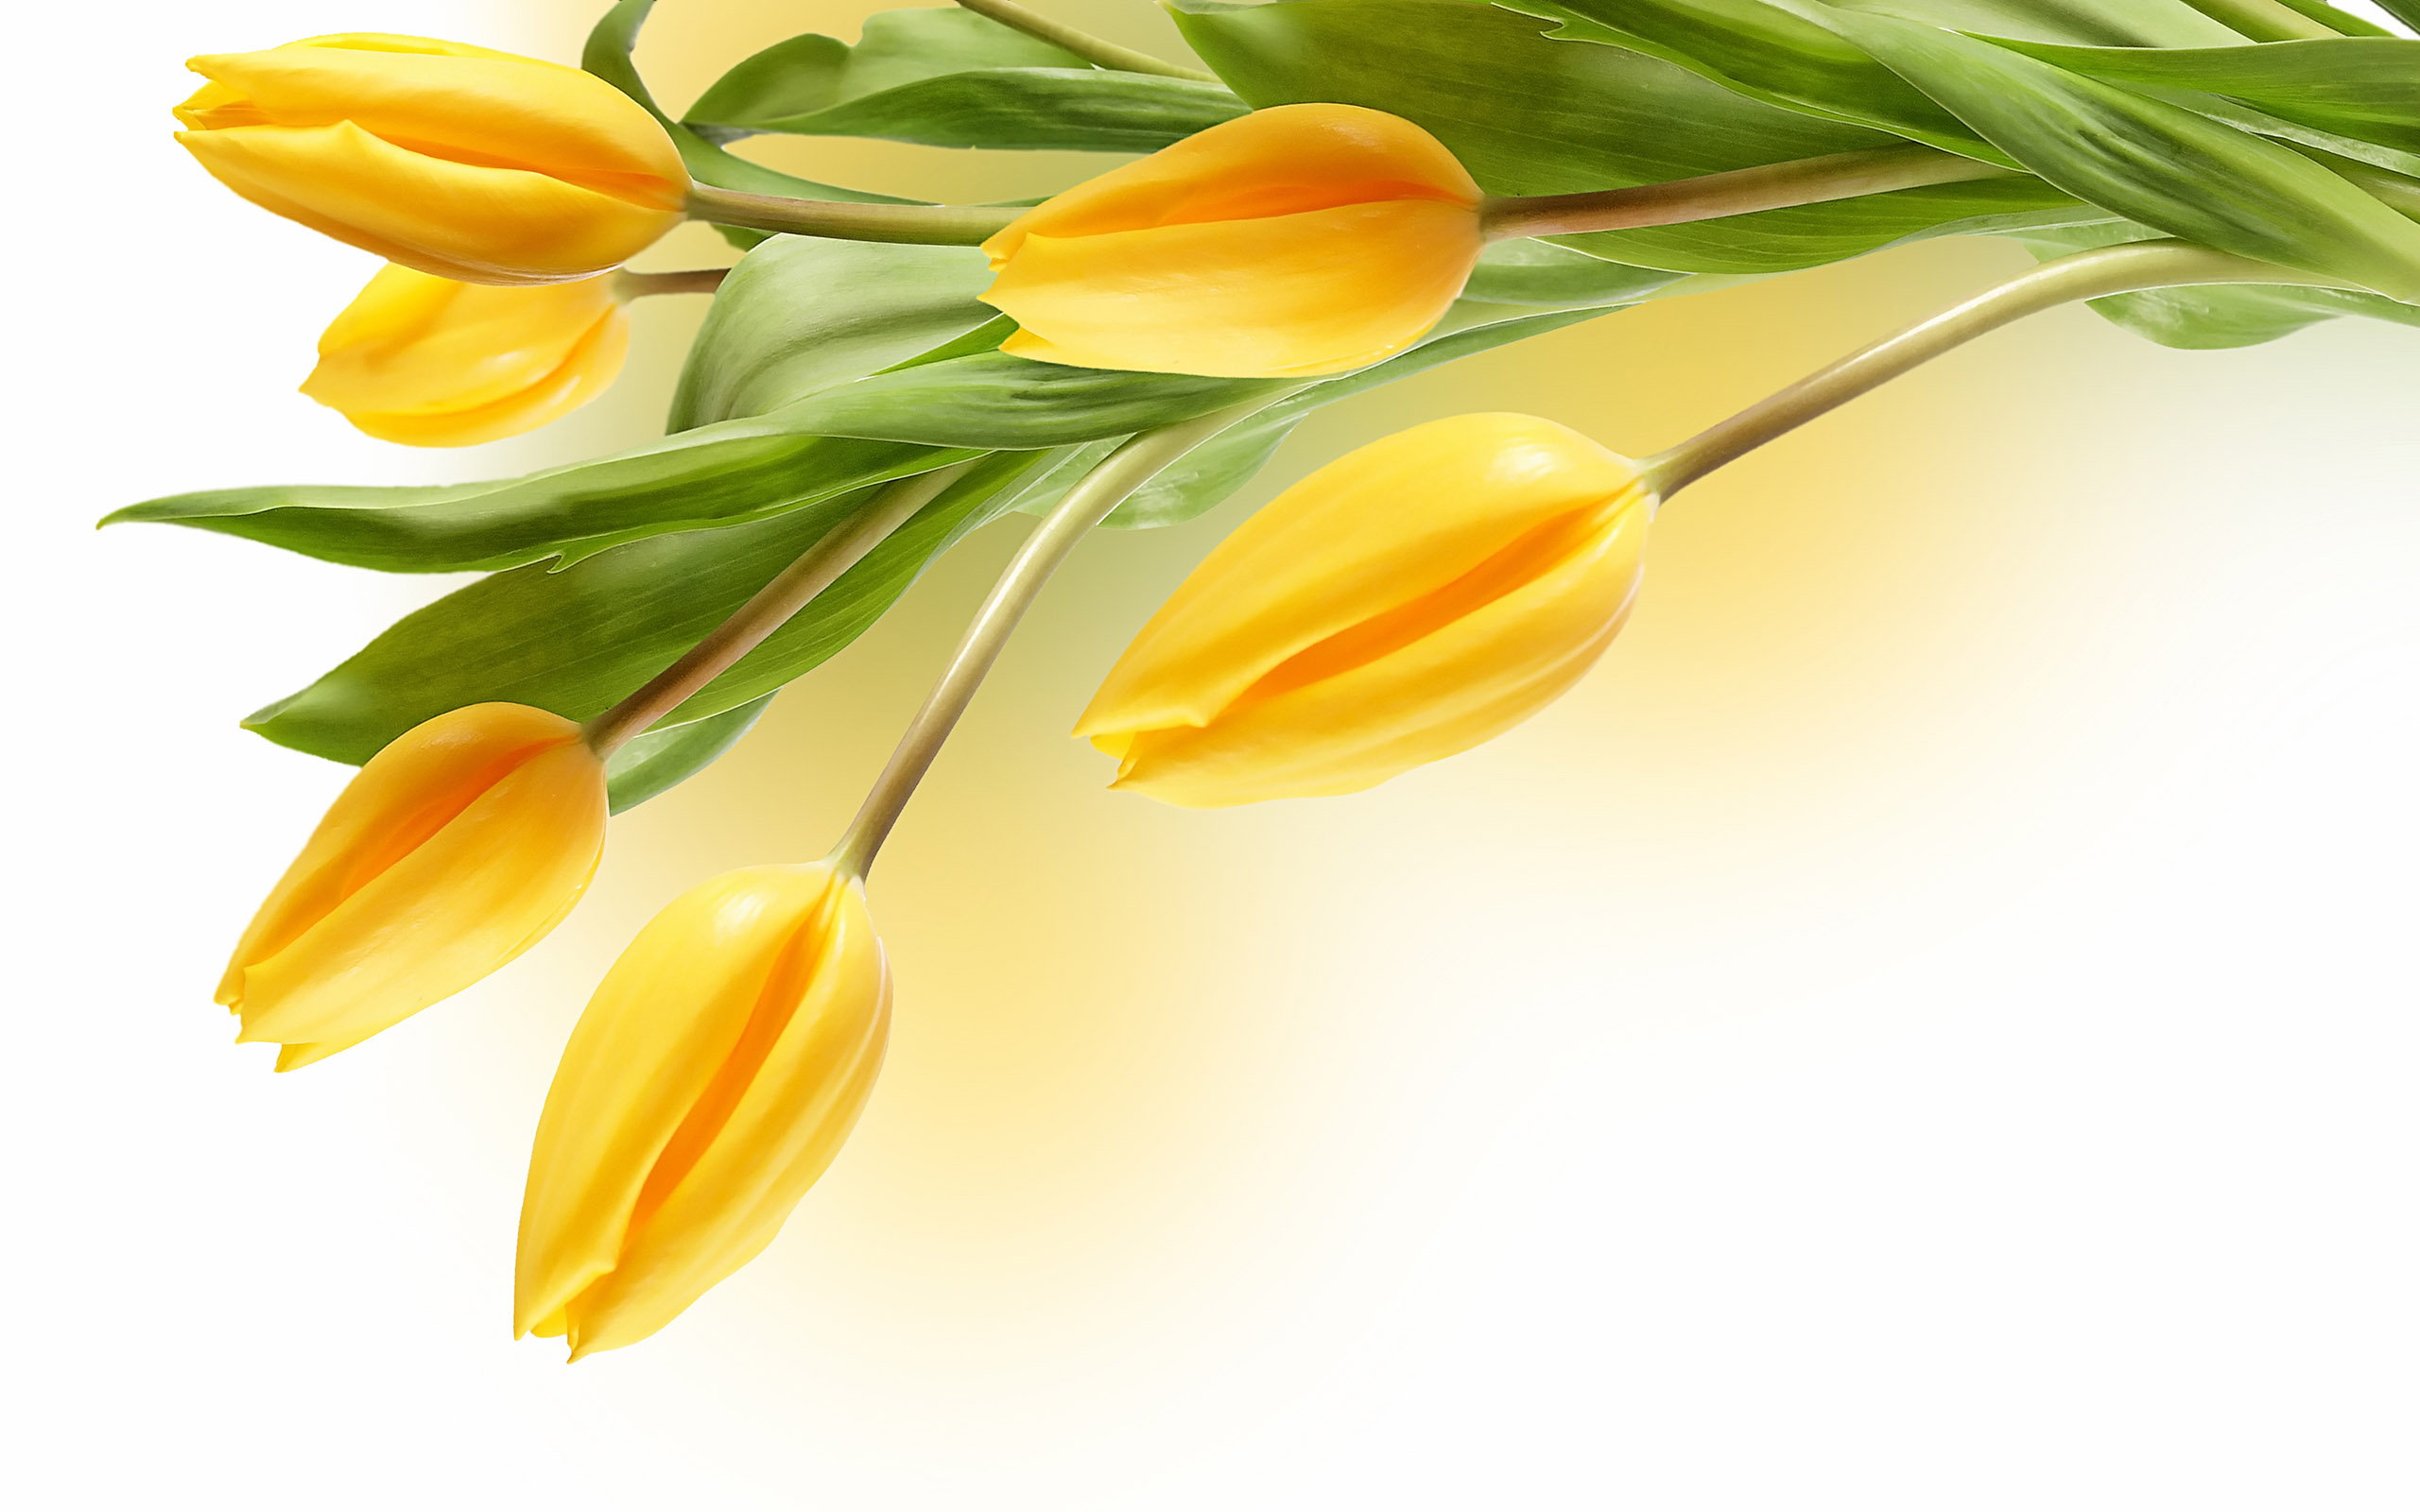 Large Tulip Picture - 1080p Images Of Flowers Hd - HD Wallpaper 